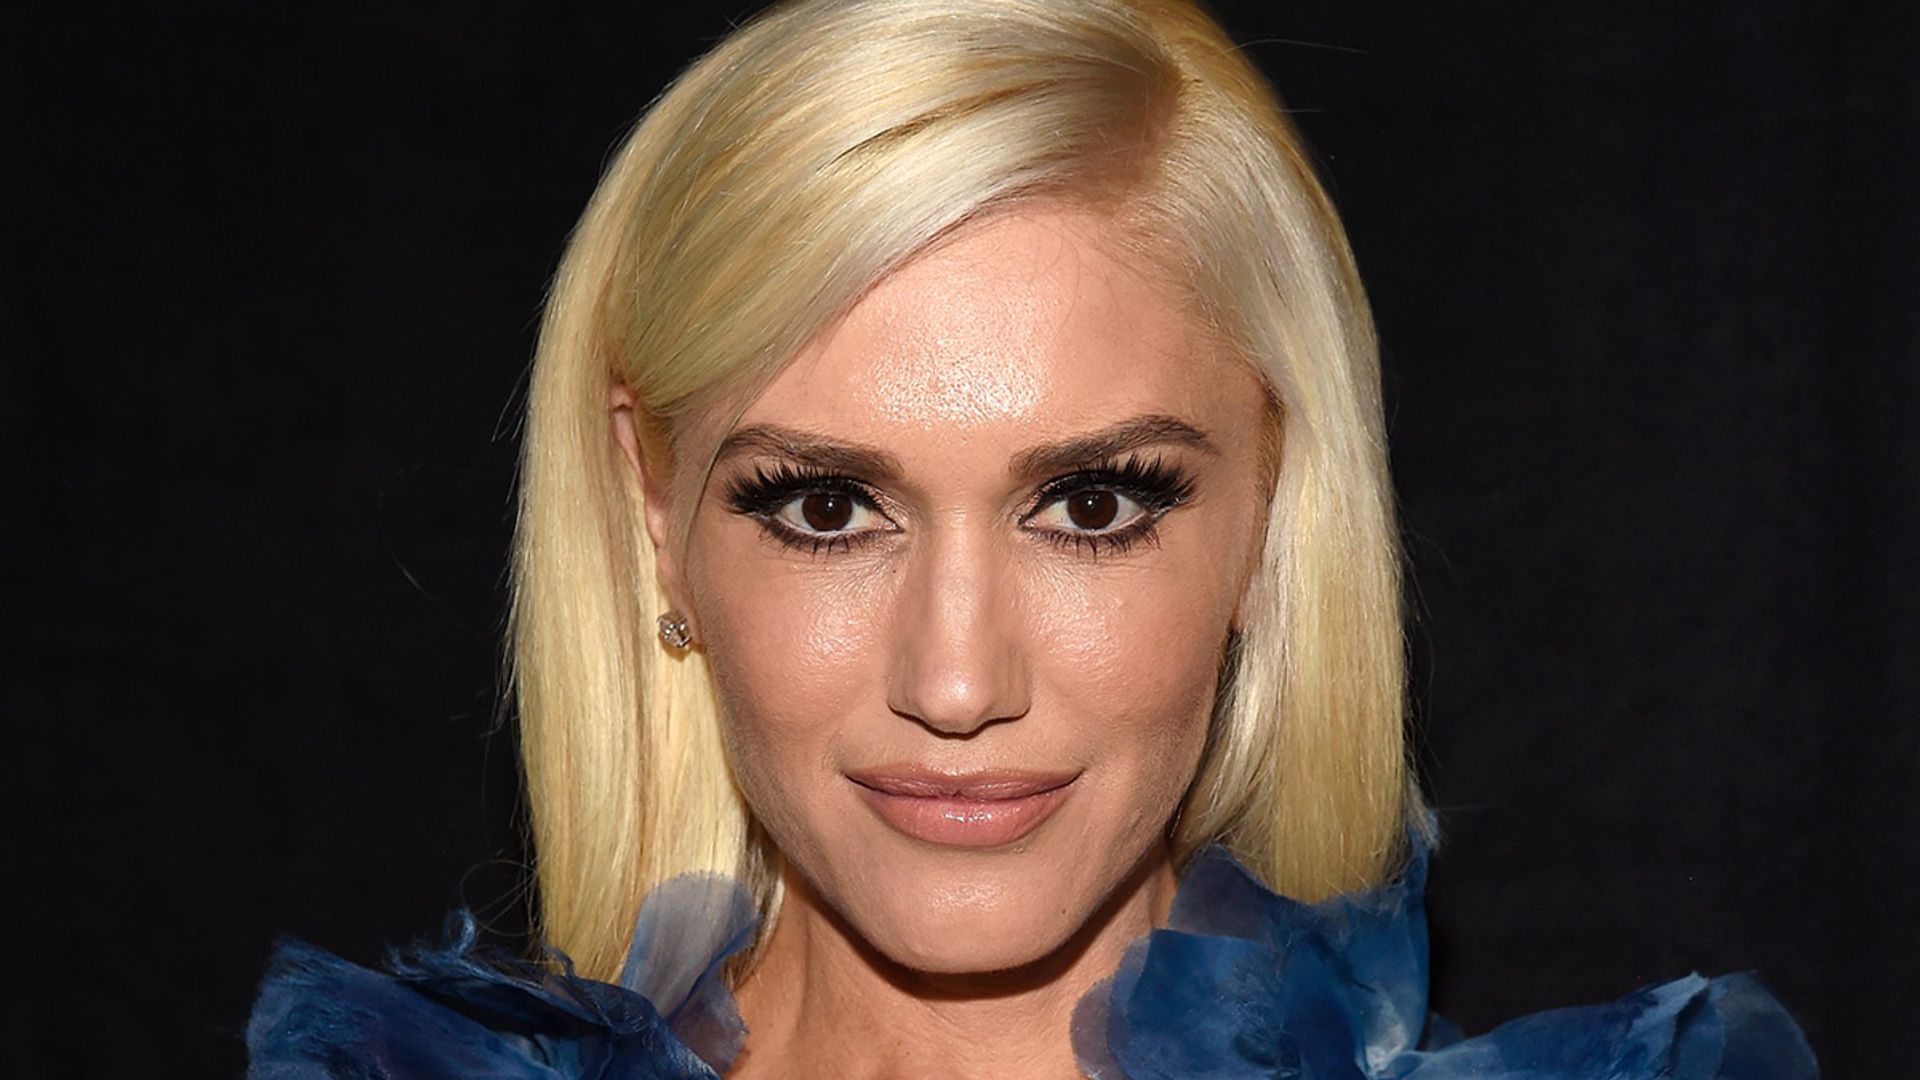 Gwen Stefani wows fans in outfit we weren't expecting